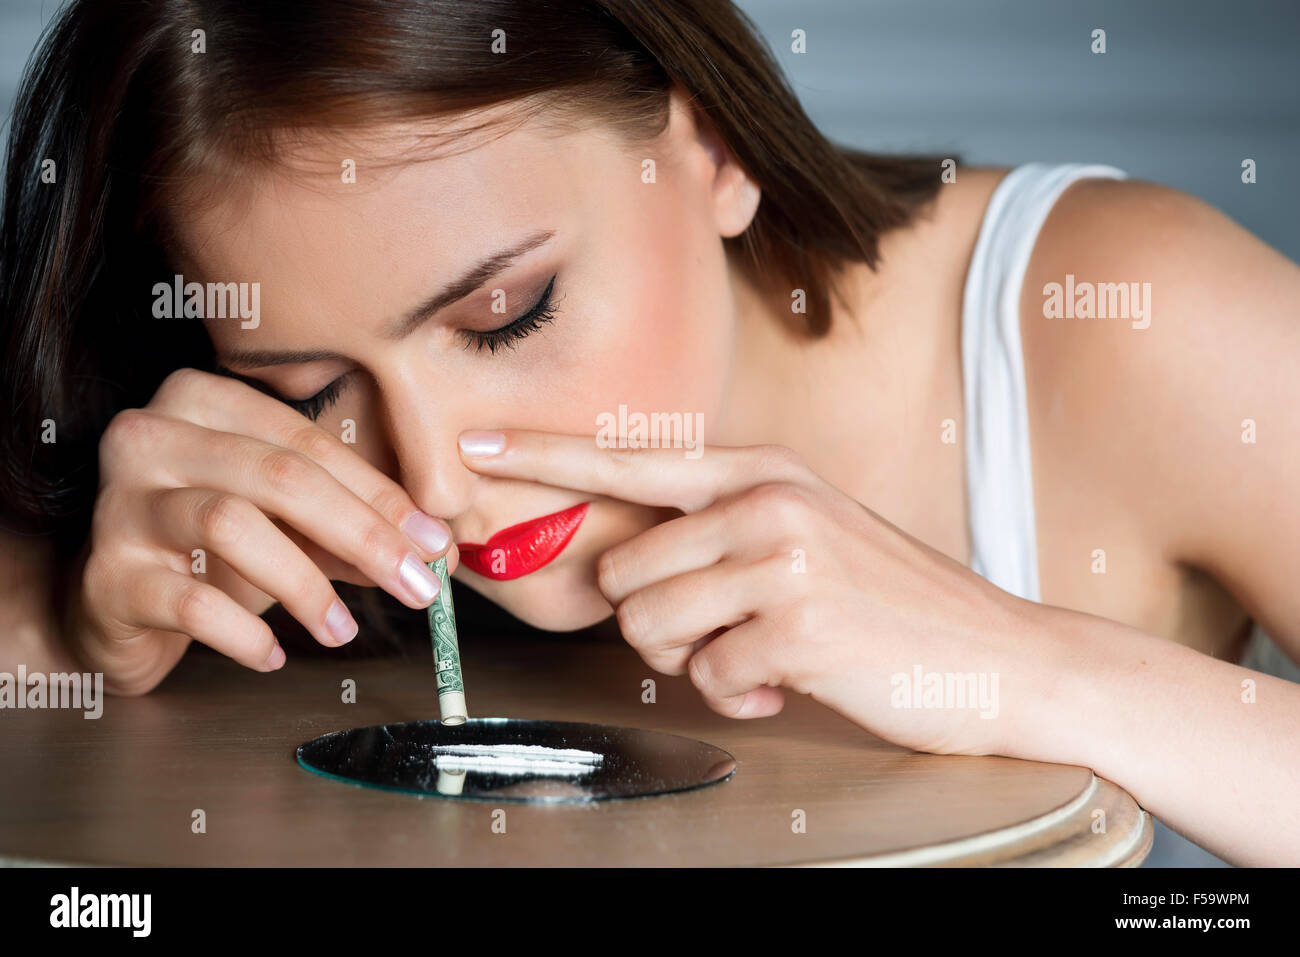 Young girl taking drugs Stock Photo